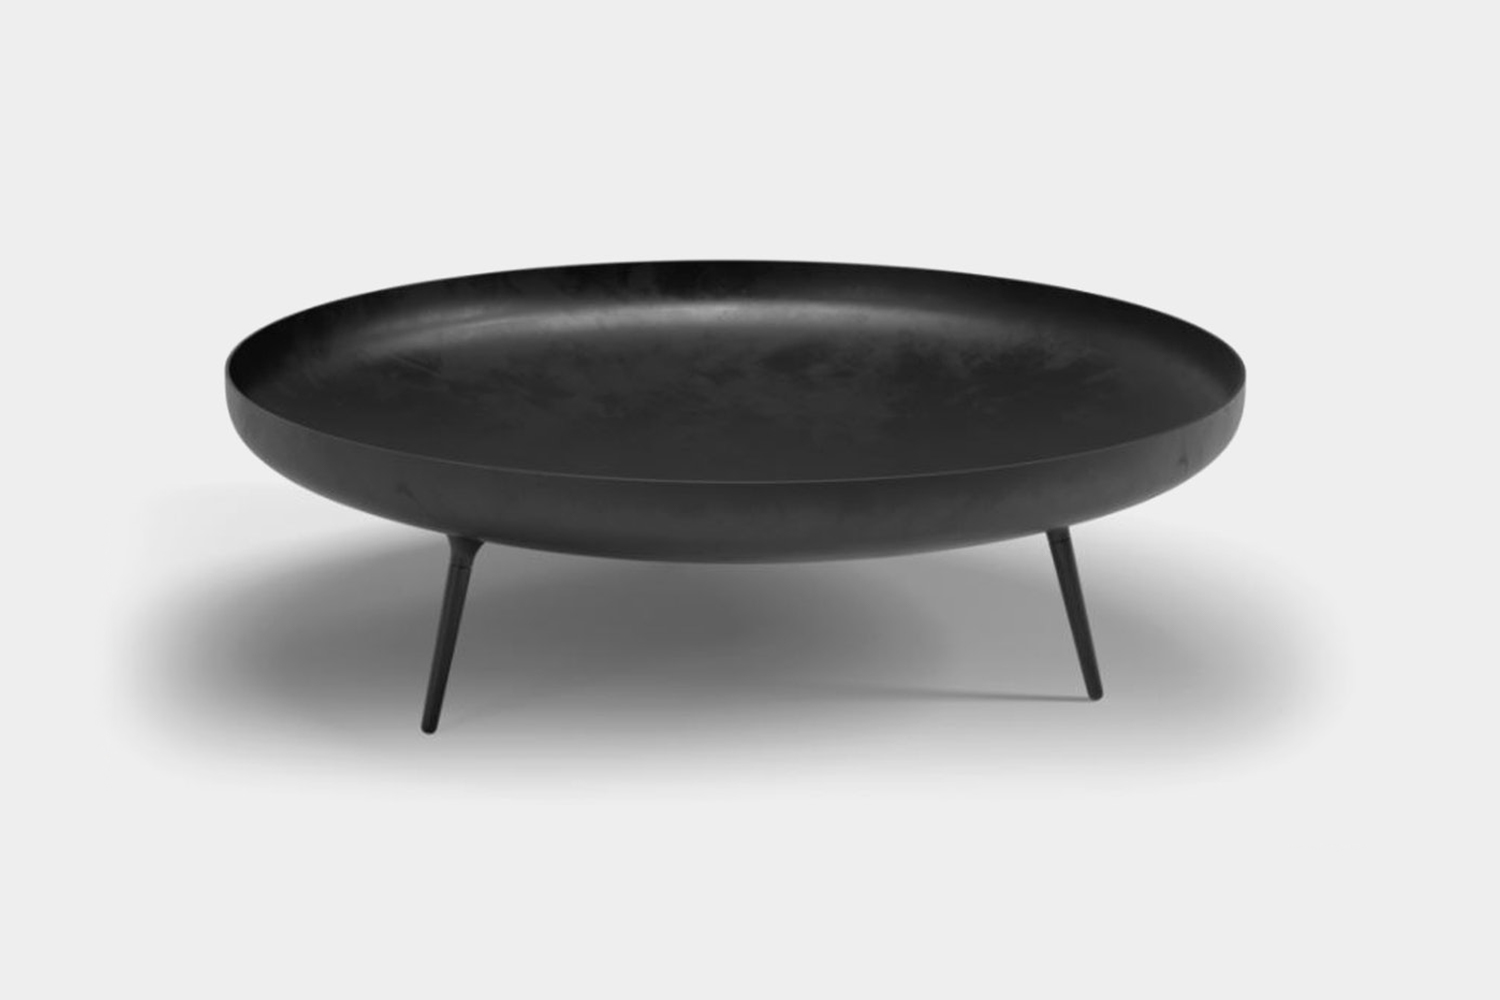 Deco Fire Bowl from Design Within Reach